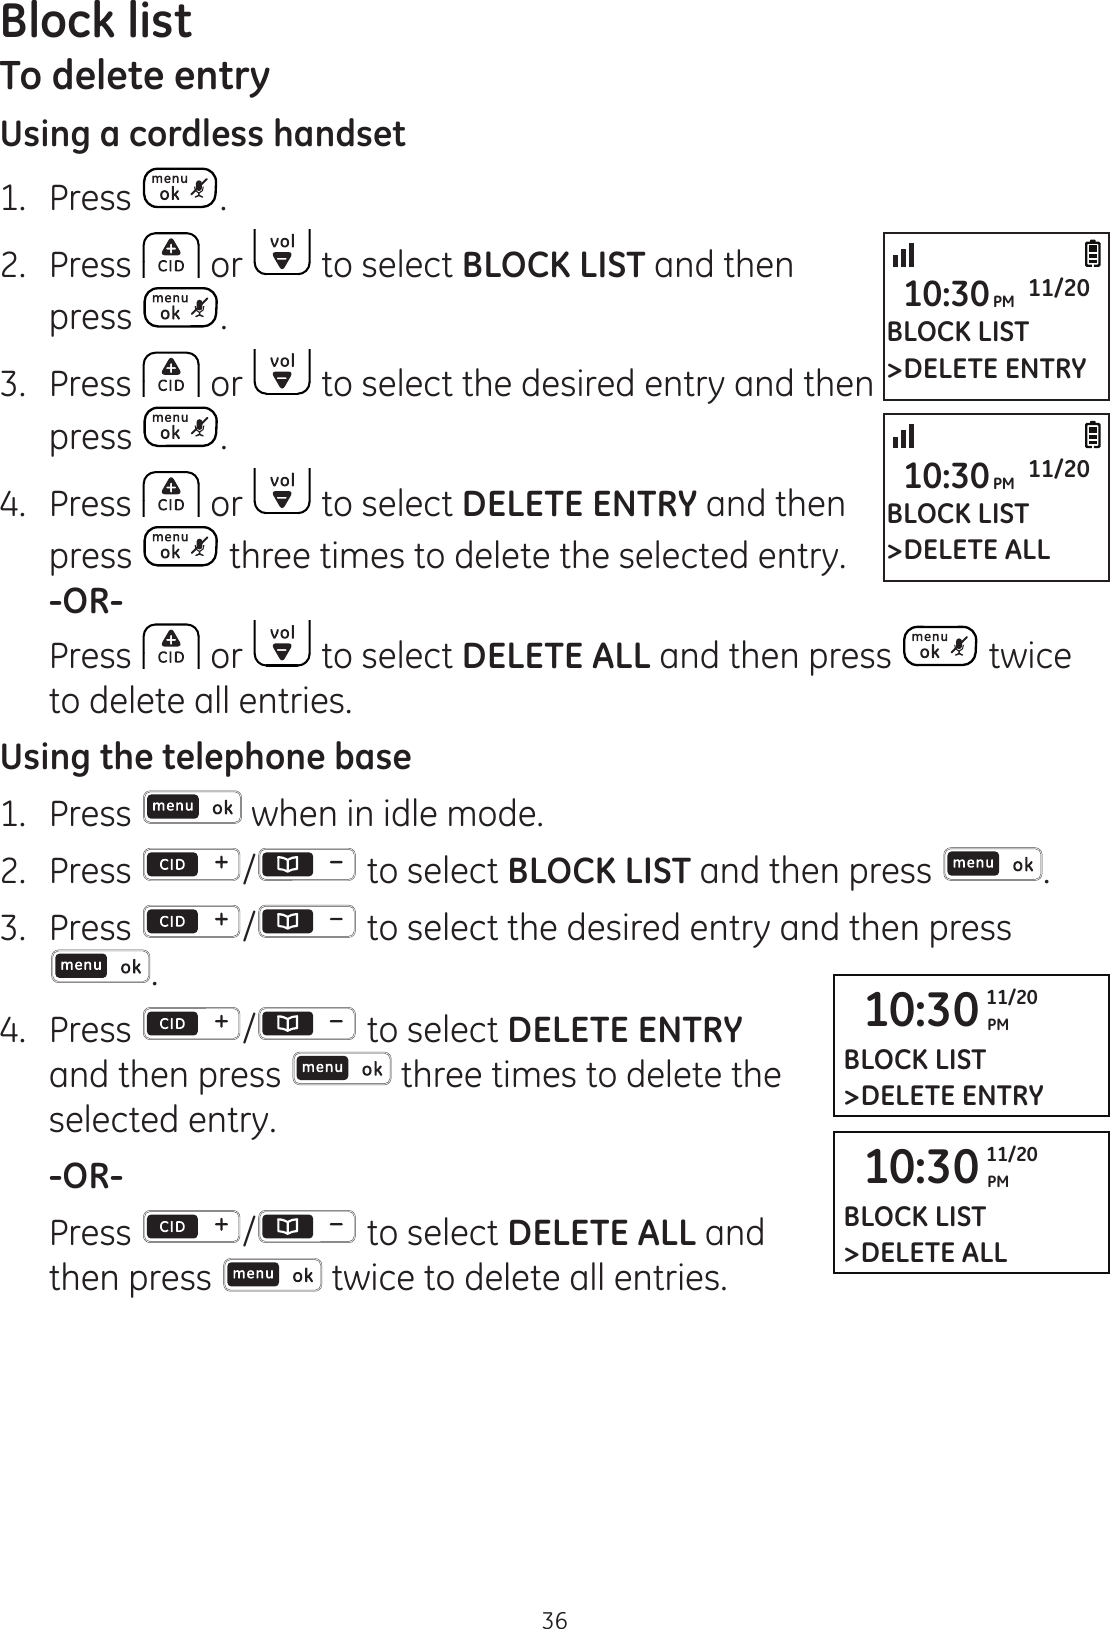 Block list36To delete entryUsing a cordless handset1.   Press . 2.  Press   or   to select BLOCK LIST and then press  .3.  Press   or   to select the desired entry and then press  . 4.  Press   or   to select DELETE ENTRY and then press   three times to delete the selected entry.  -OR-  Press   or   to select DELETE ALL and then press   twice to delete all entries.Using the telephone base1.  Press   when in idle mode. 2.   Press  /  to select BLOCK LIST and then press  .3.  Press  /  to select the desired entry and then press .4.  Press  /  to select DELETE ENTRY and then press   three times to delete the selected entry. -OR-  Press  / to select DELETE ALL and then press  twice to delete all entries.10:30 PM11/20BLOCK LIST&gt;DELETE ENTRY10:30 PM11/20BLOCK LIST&gt;DELETE ALLBLOCK LIST&gt;DELETE ENTRY10:30PM 11/20BLOCK LIST&gt;DELETE ALL10:30PM 11/20